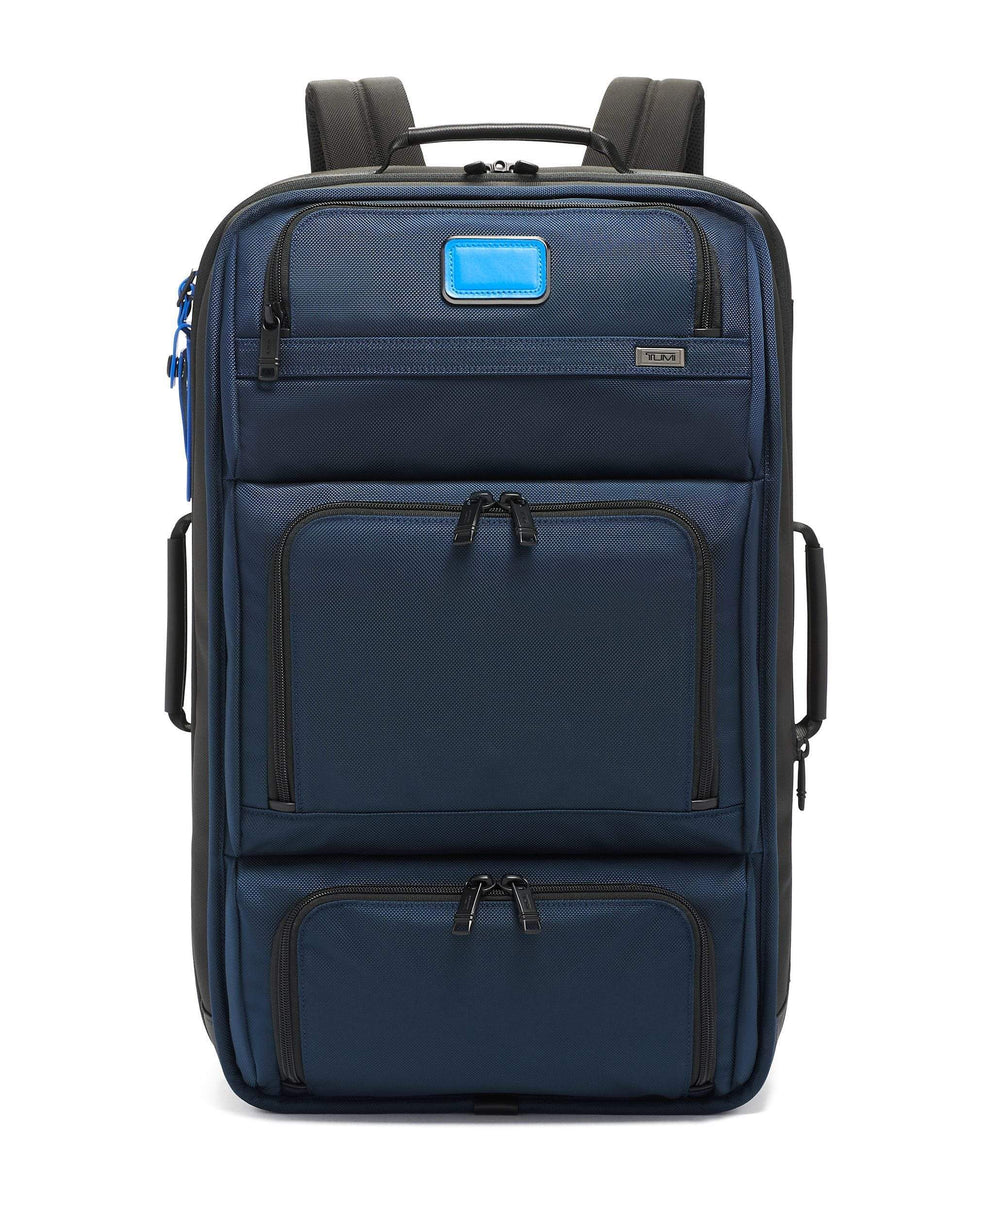 Excursion Backpack Duffel